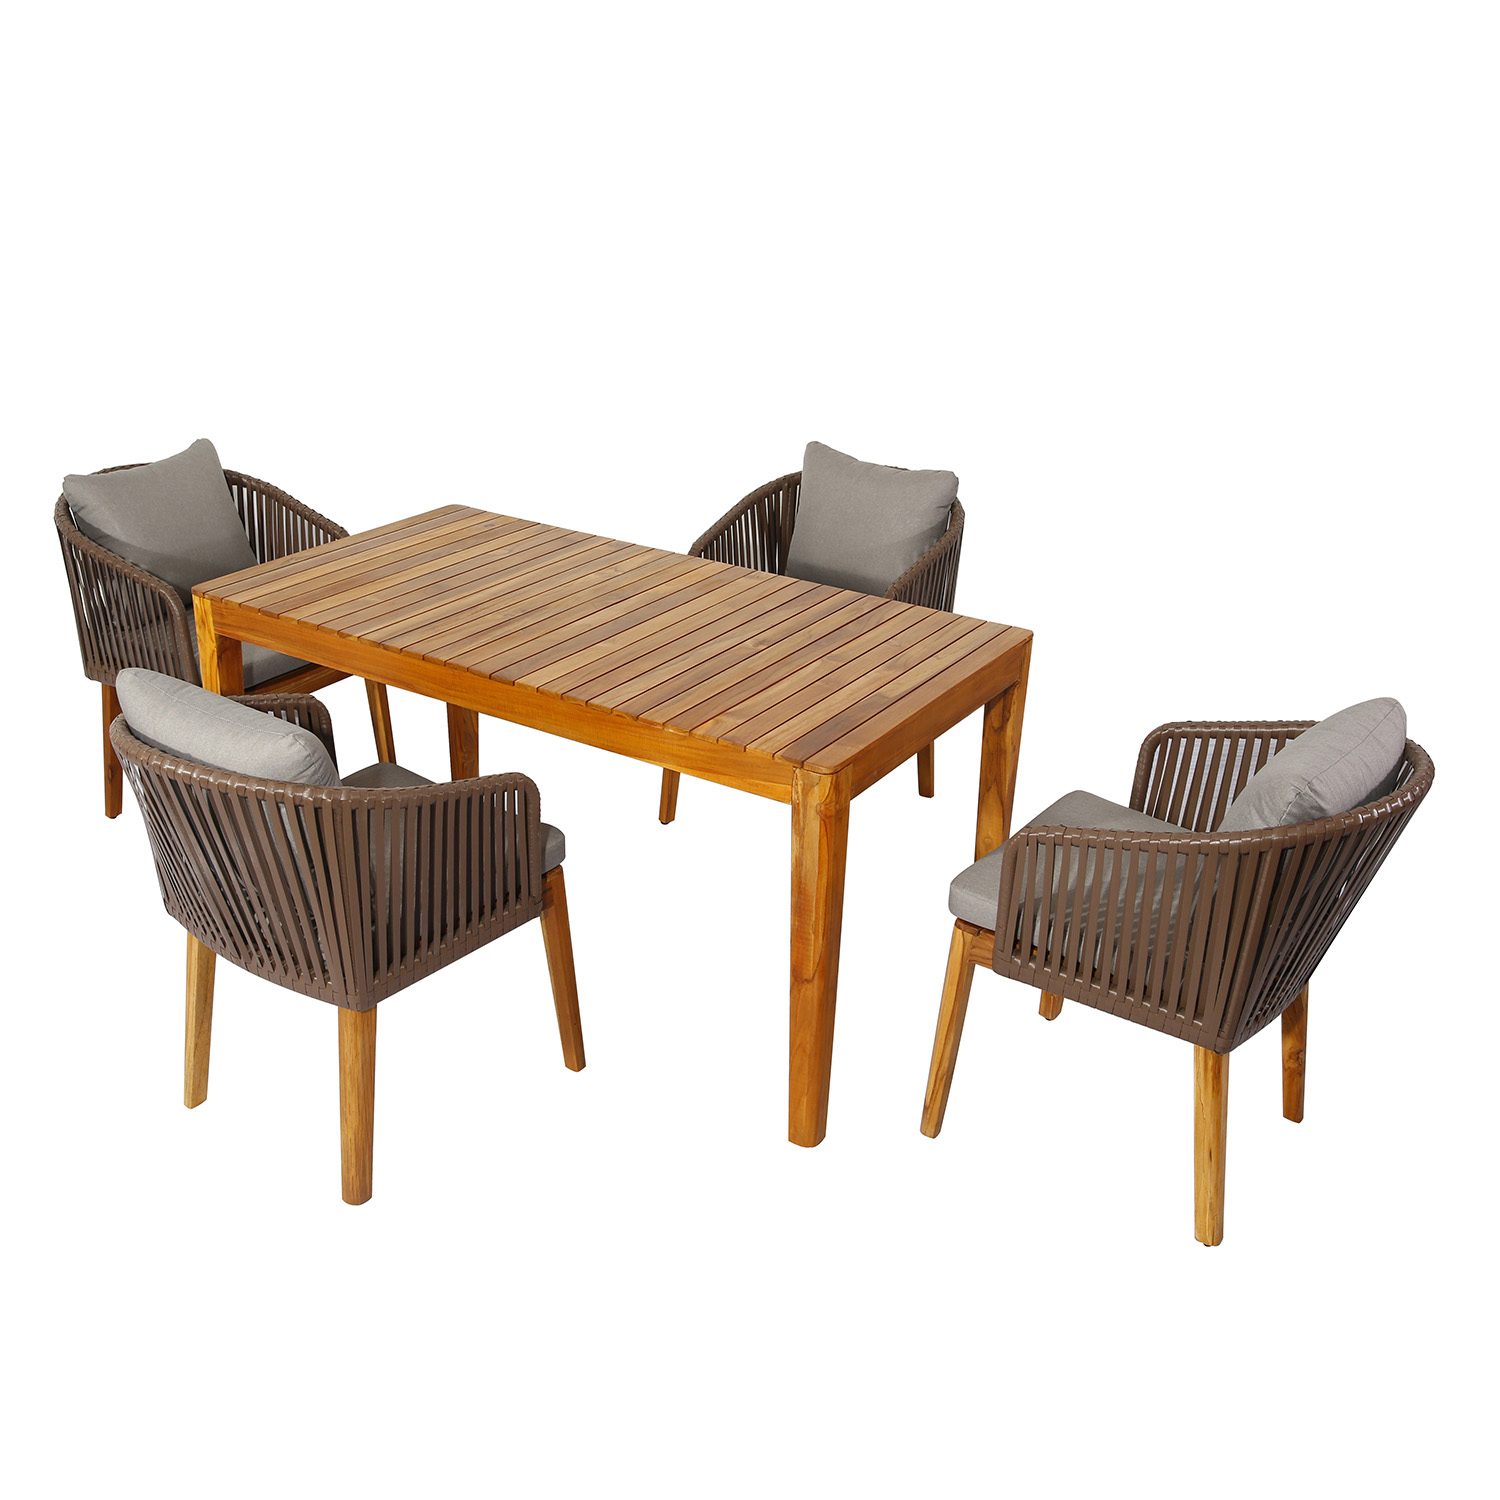 CZ003 Teakwood Garden Furniture Dining Set Outdoor Dining Table and Chair Set